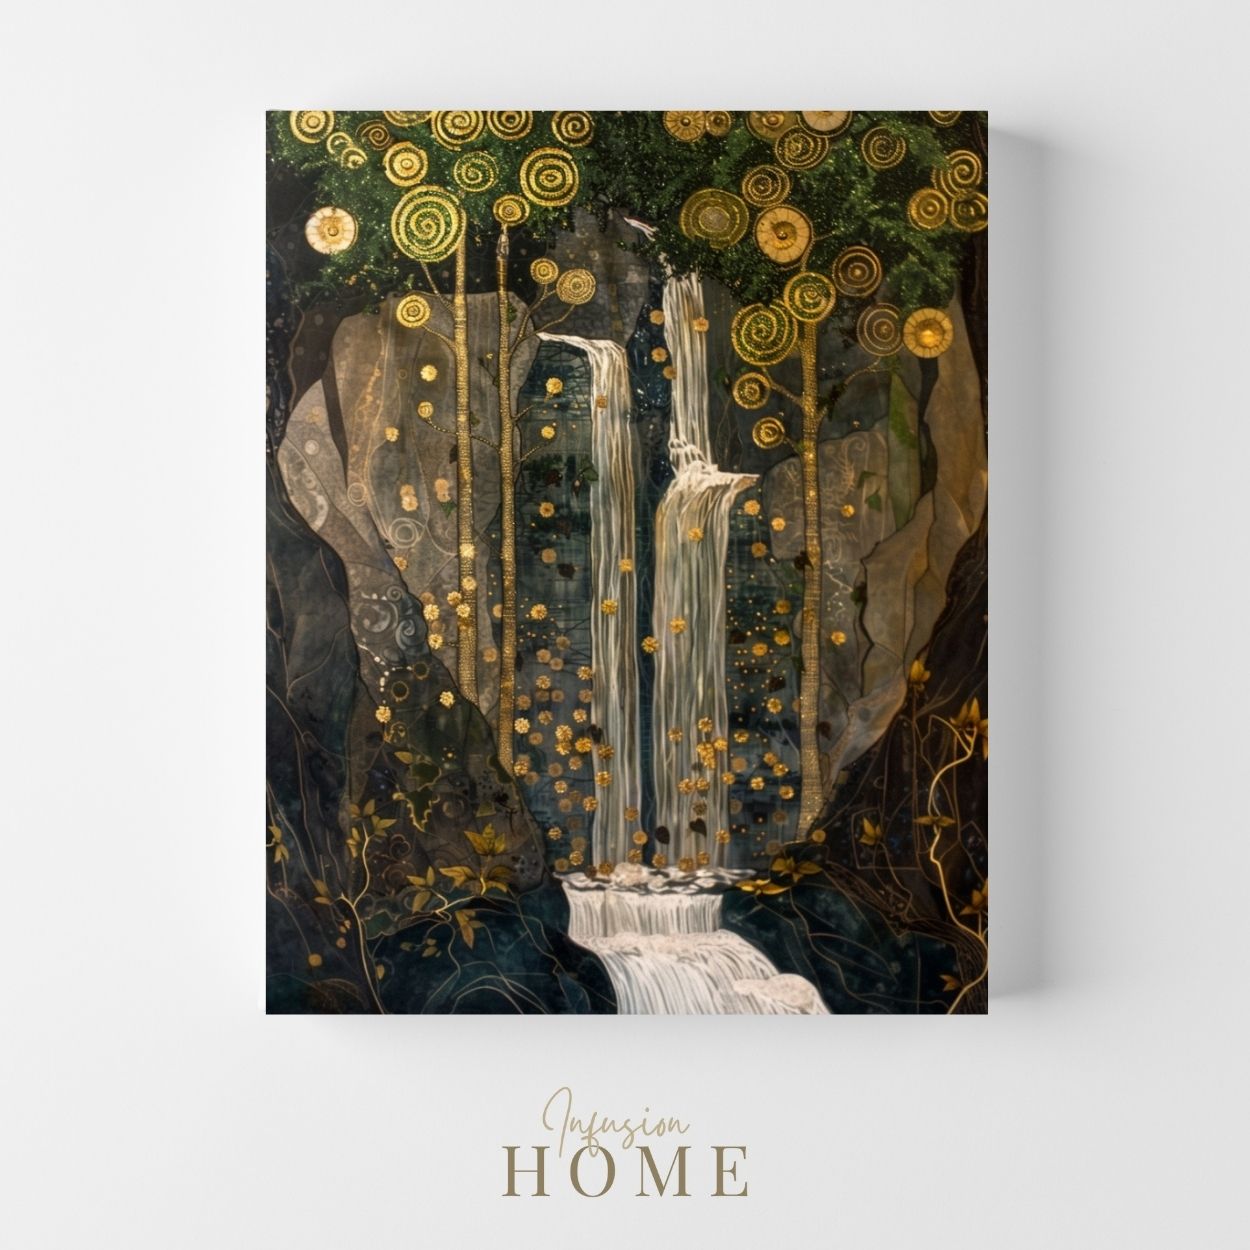 Product image of canvas print wall art featuring a waterfall surrounded by golden trees